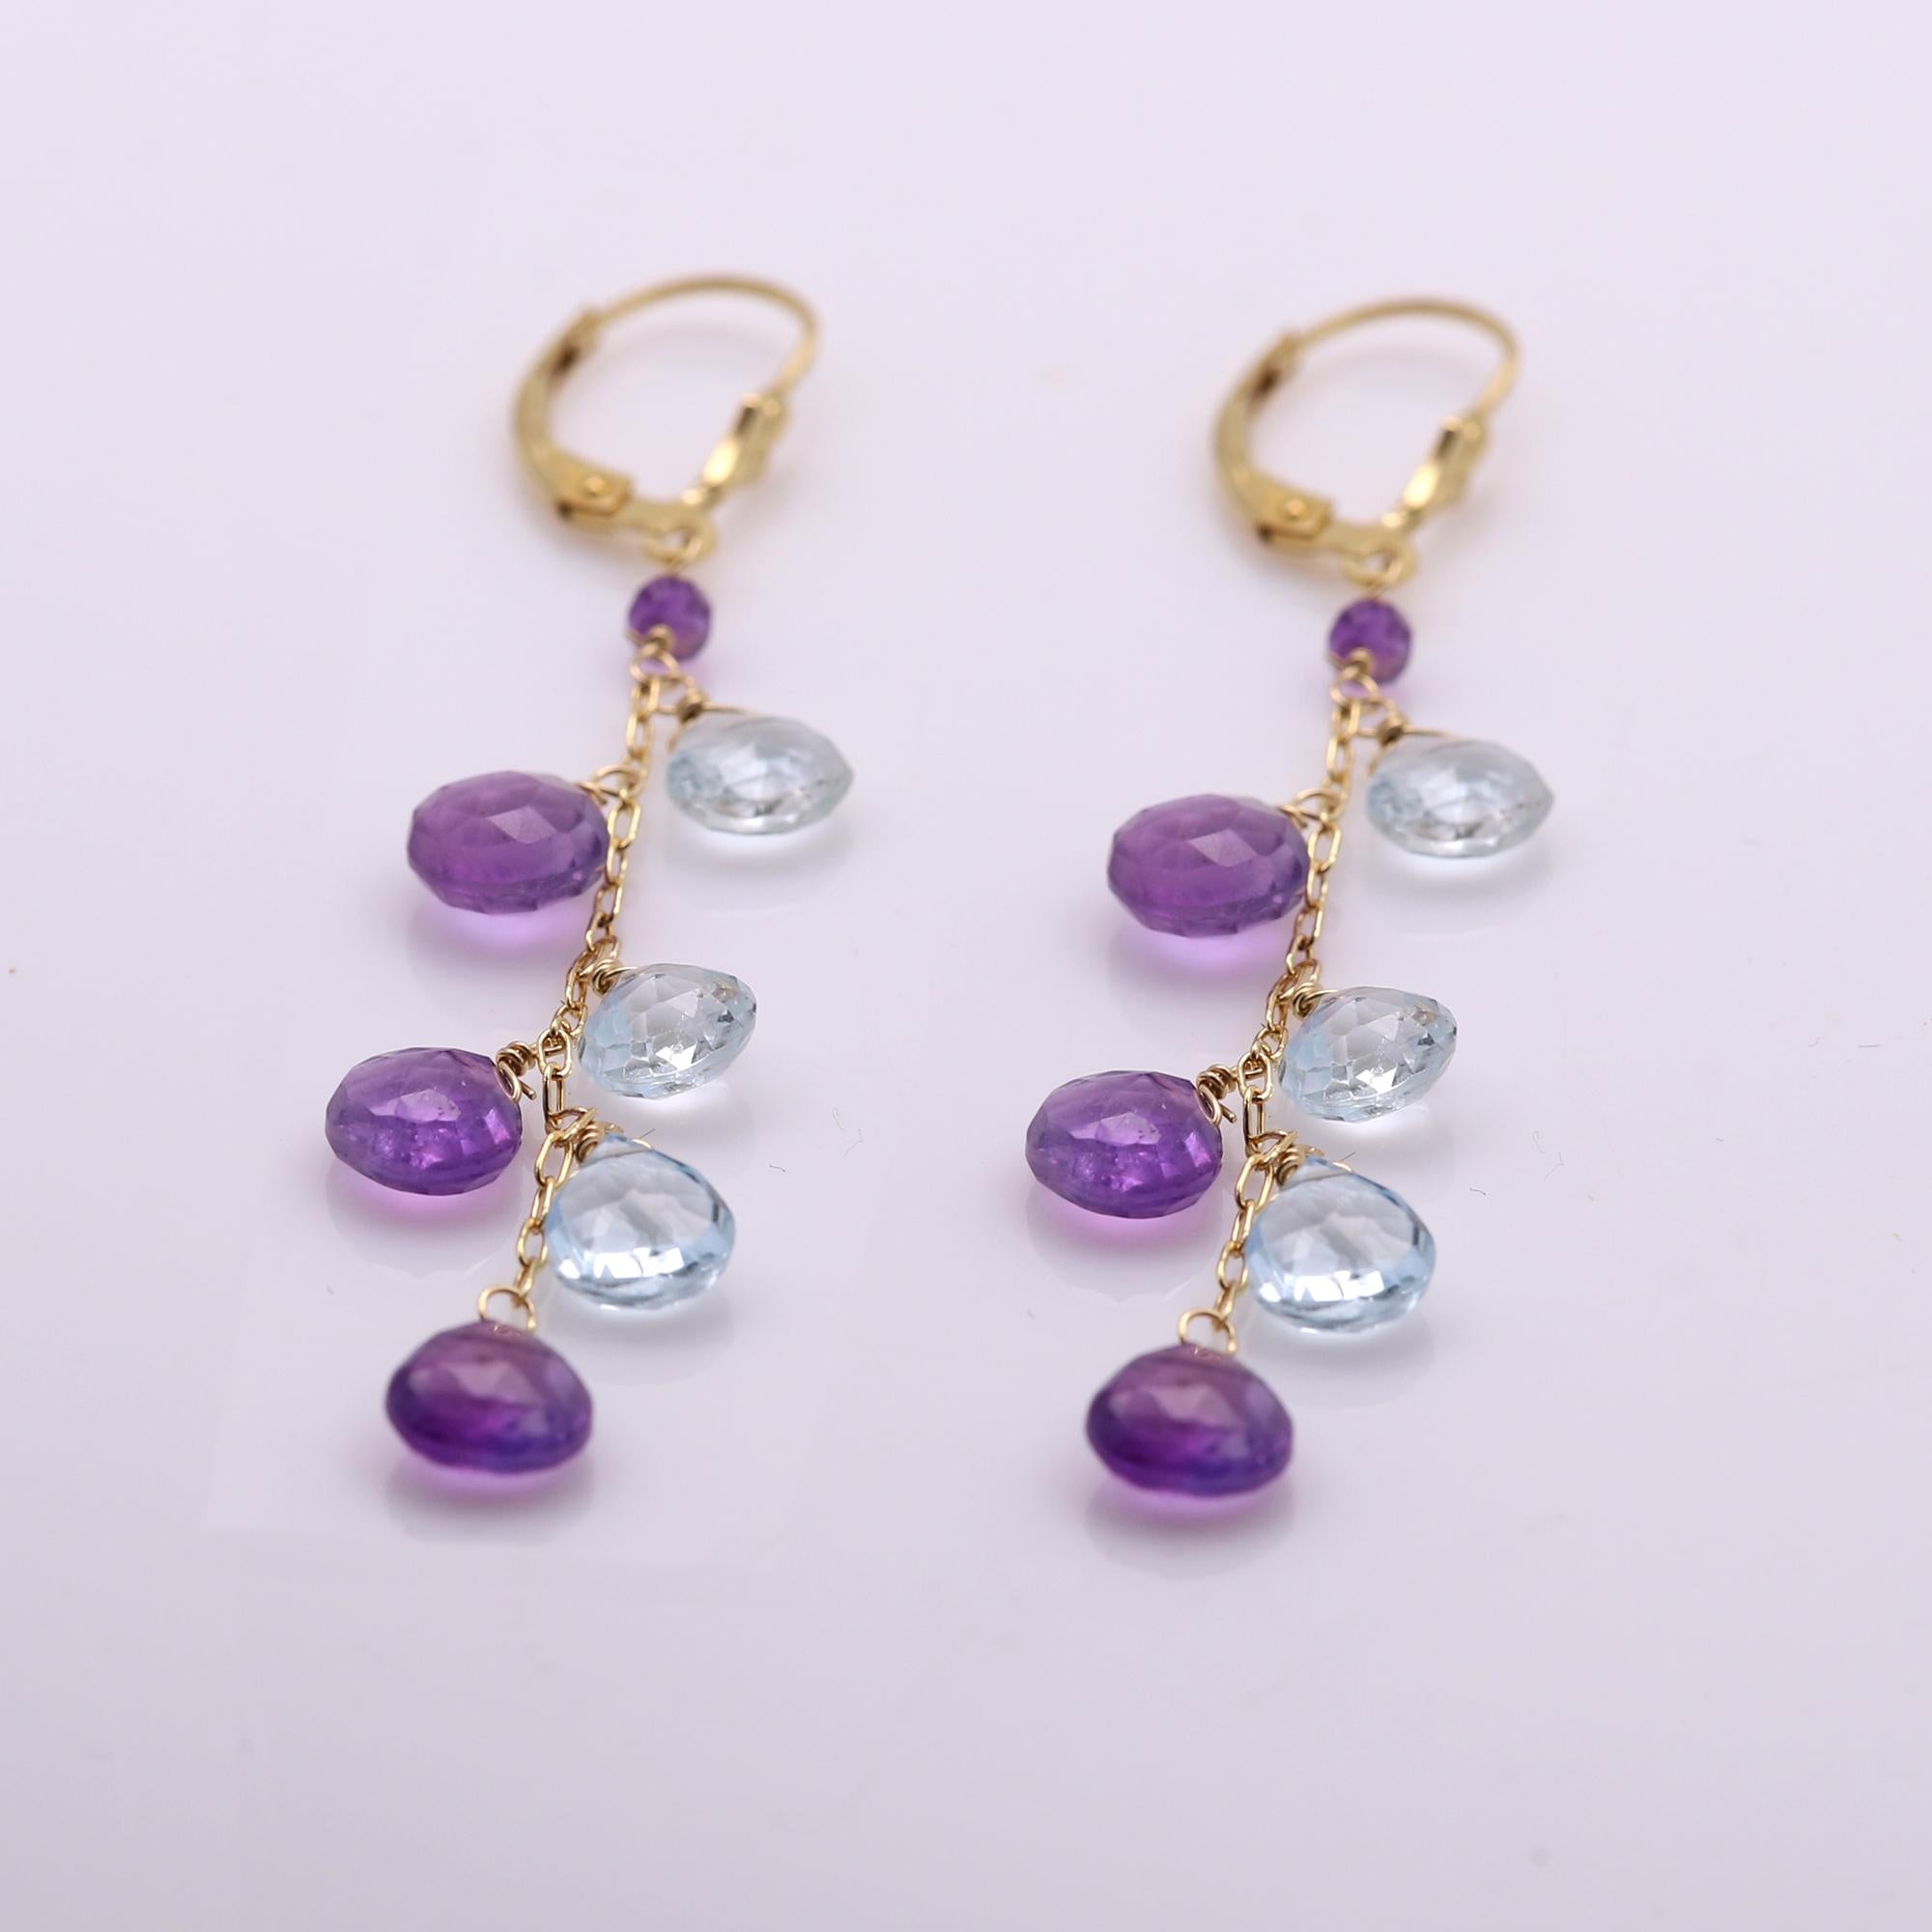 New Brilliant Elegant Dangling Earrings for Woman and Girls.
Approx. 2.5